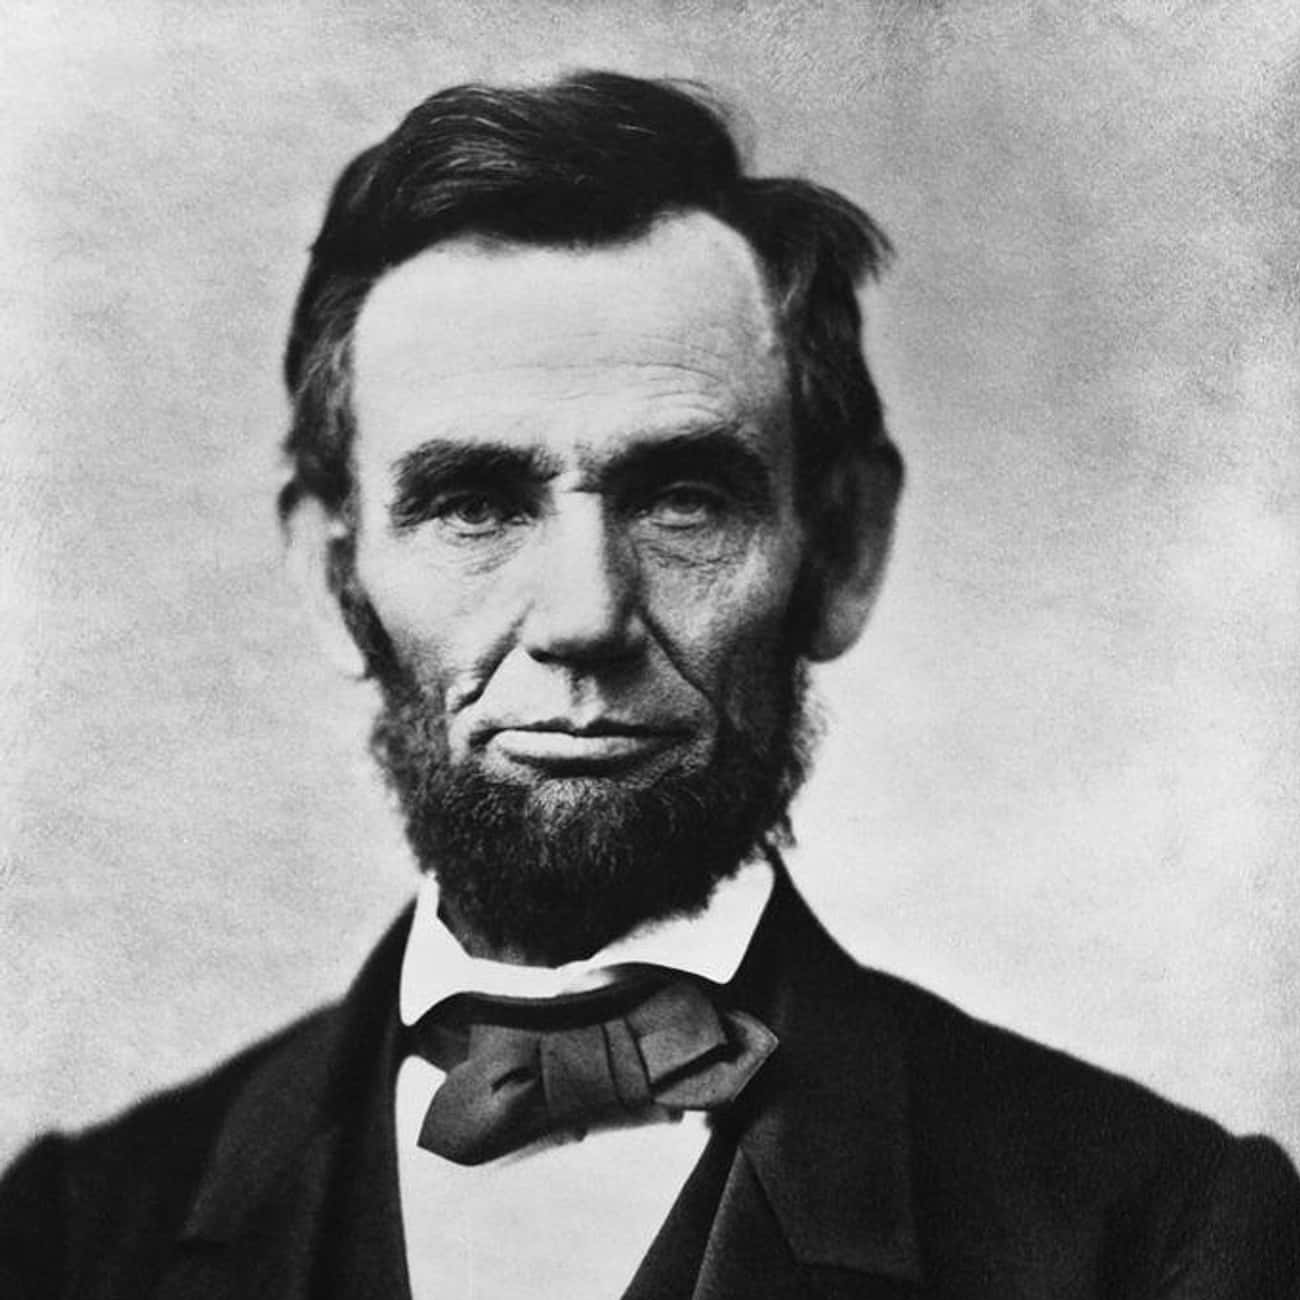 Abraham Lincoln May Have Passed Syphilis On To His Wife